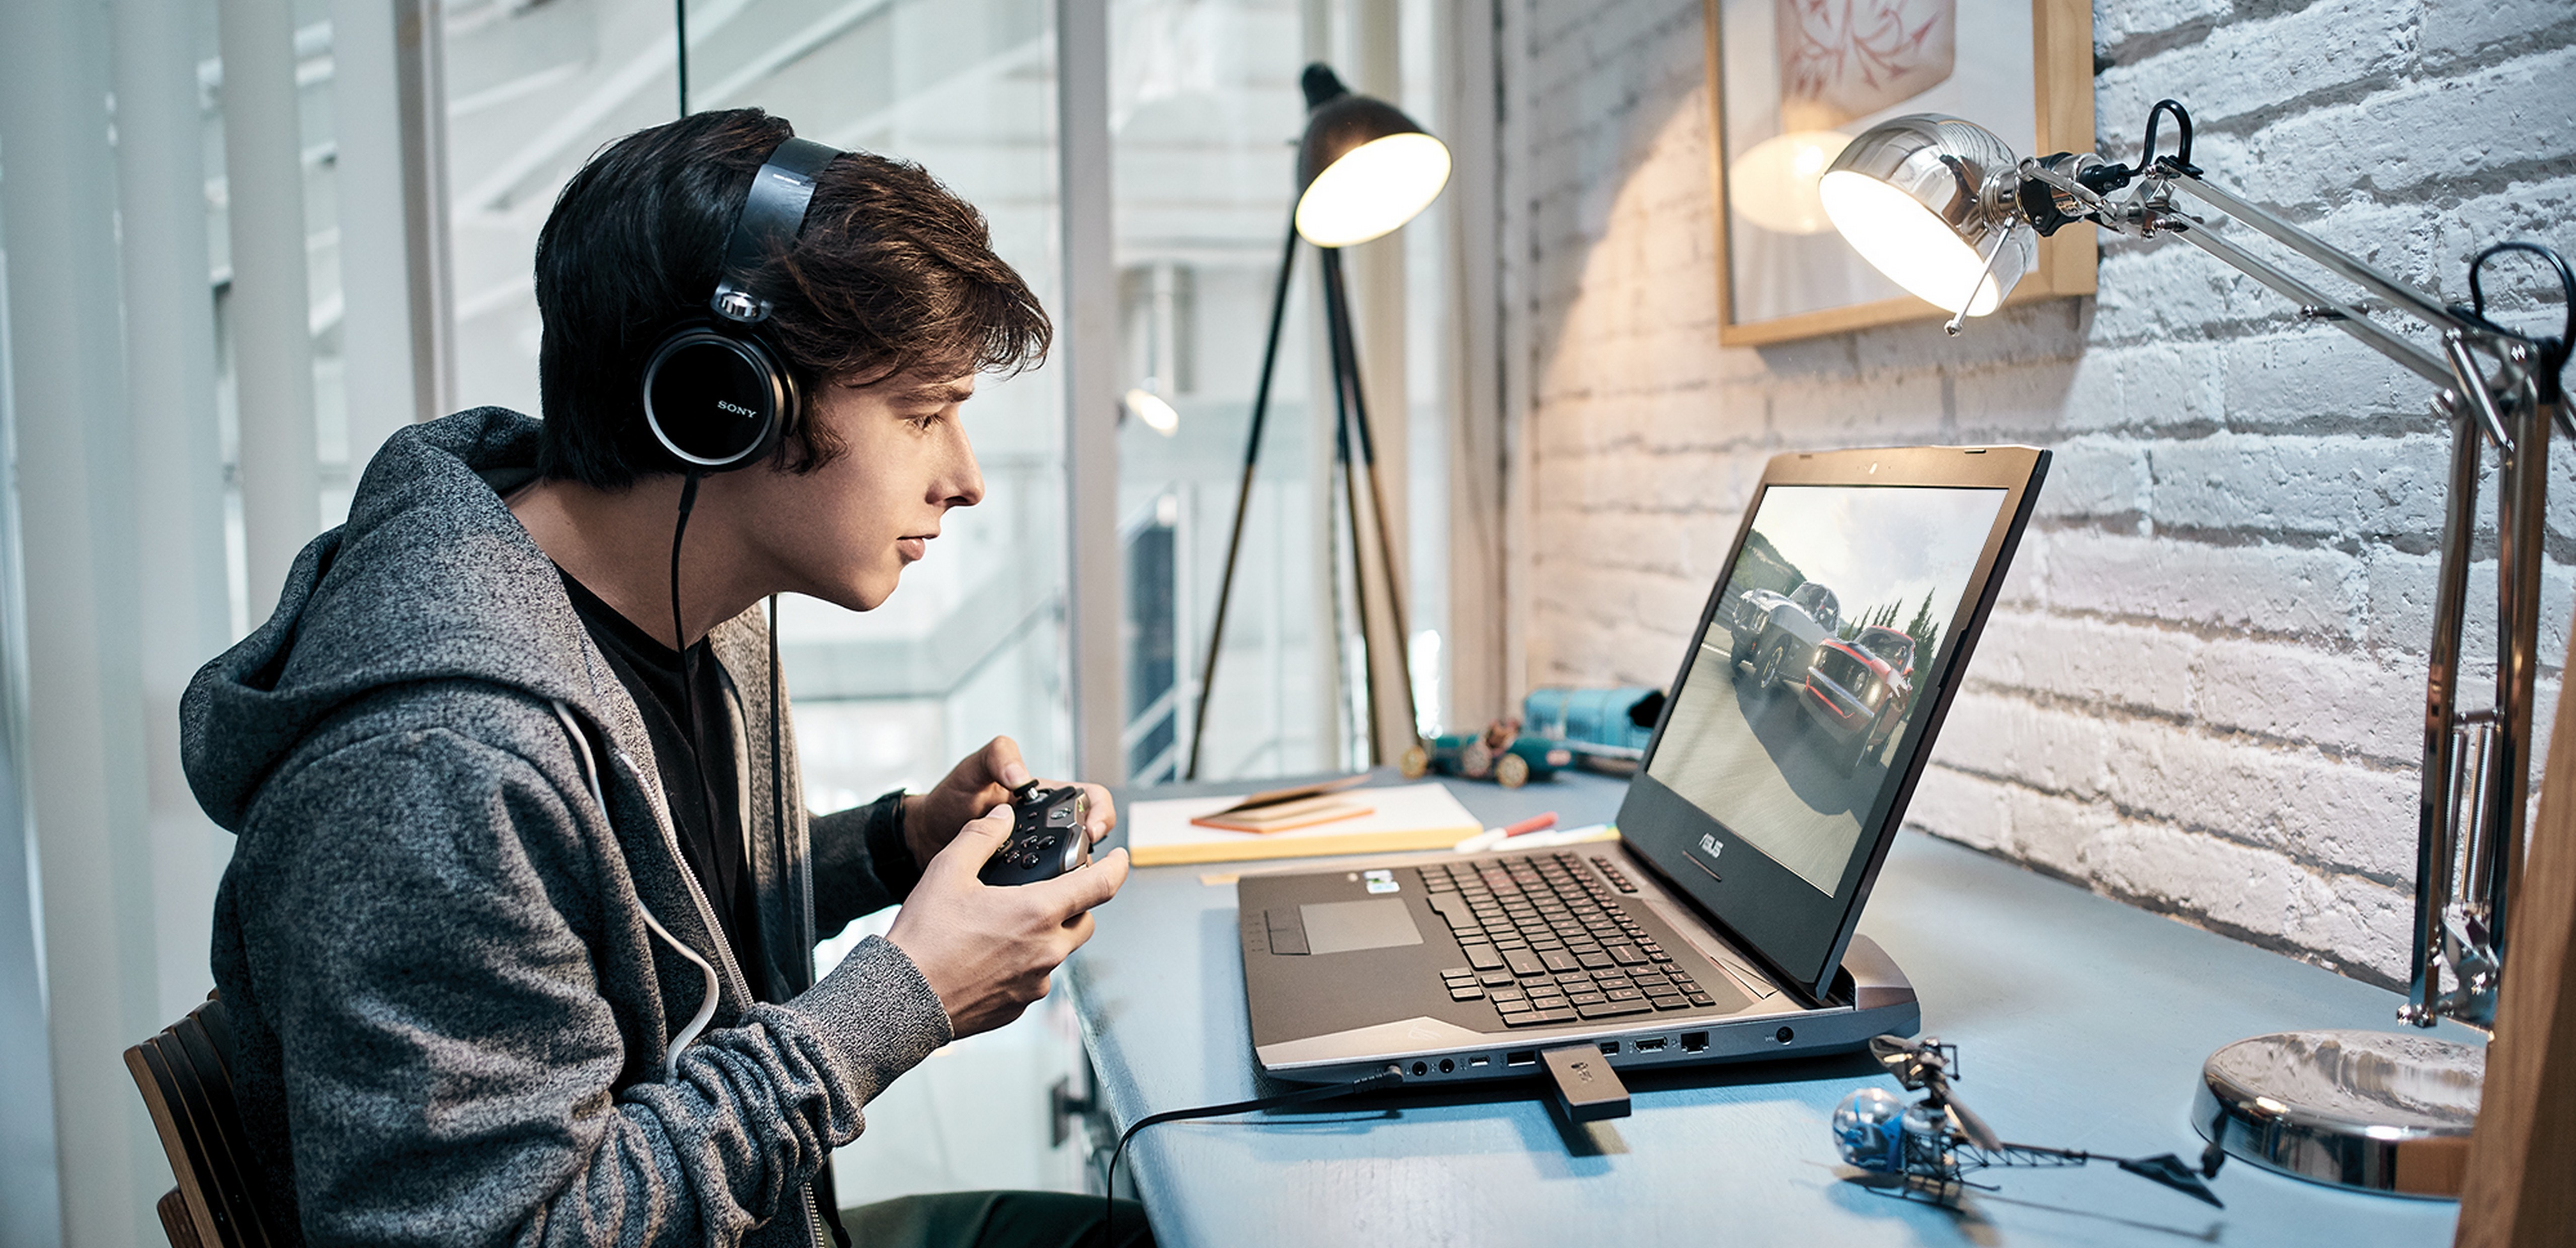 Young man sitting at a desk with headphones on plays video games on a Windows 10 PC with an Xbox controller.